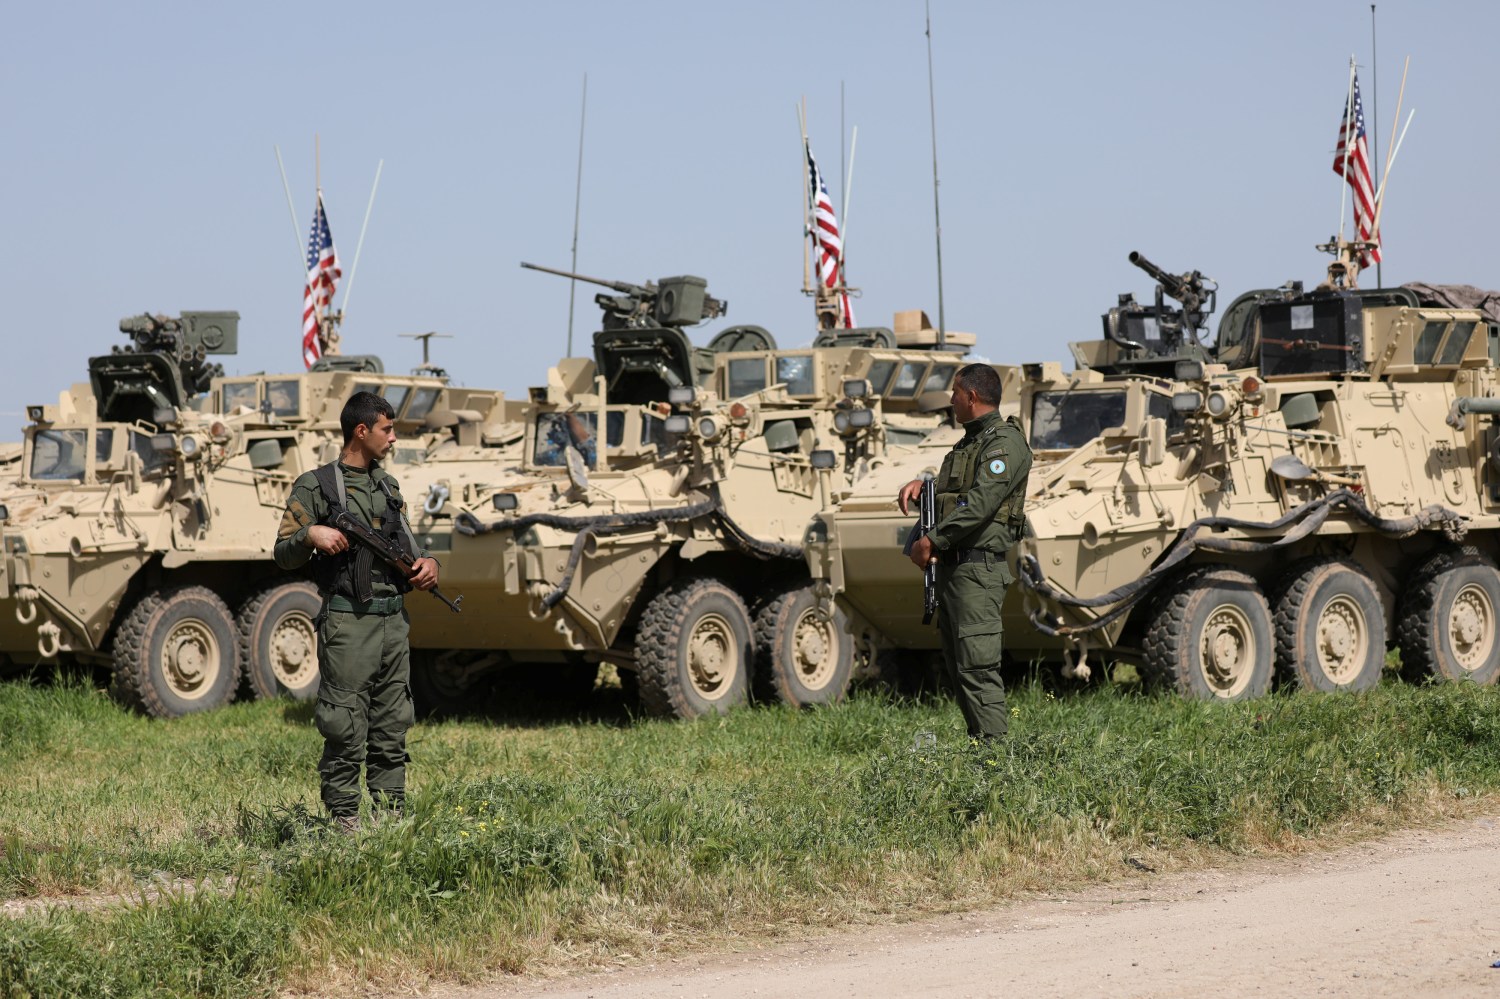 Kurdish fighters from the People's Protection Units (YPG) stand near U.S military vehicles in the town of Darbasiya next to the Turkish border, Syria April 29, 2017. Picture taken April 29, 2017. REUTERS/Rodi Said - RC16C054E9B0